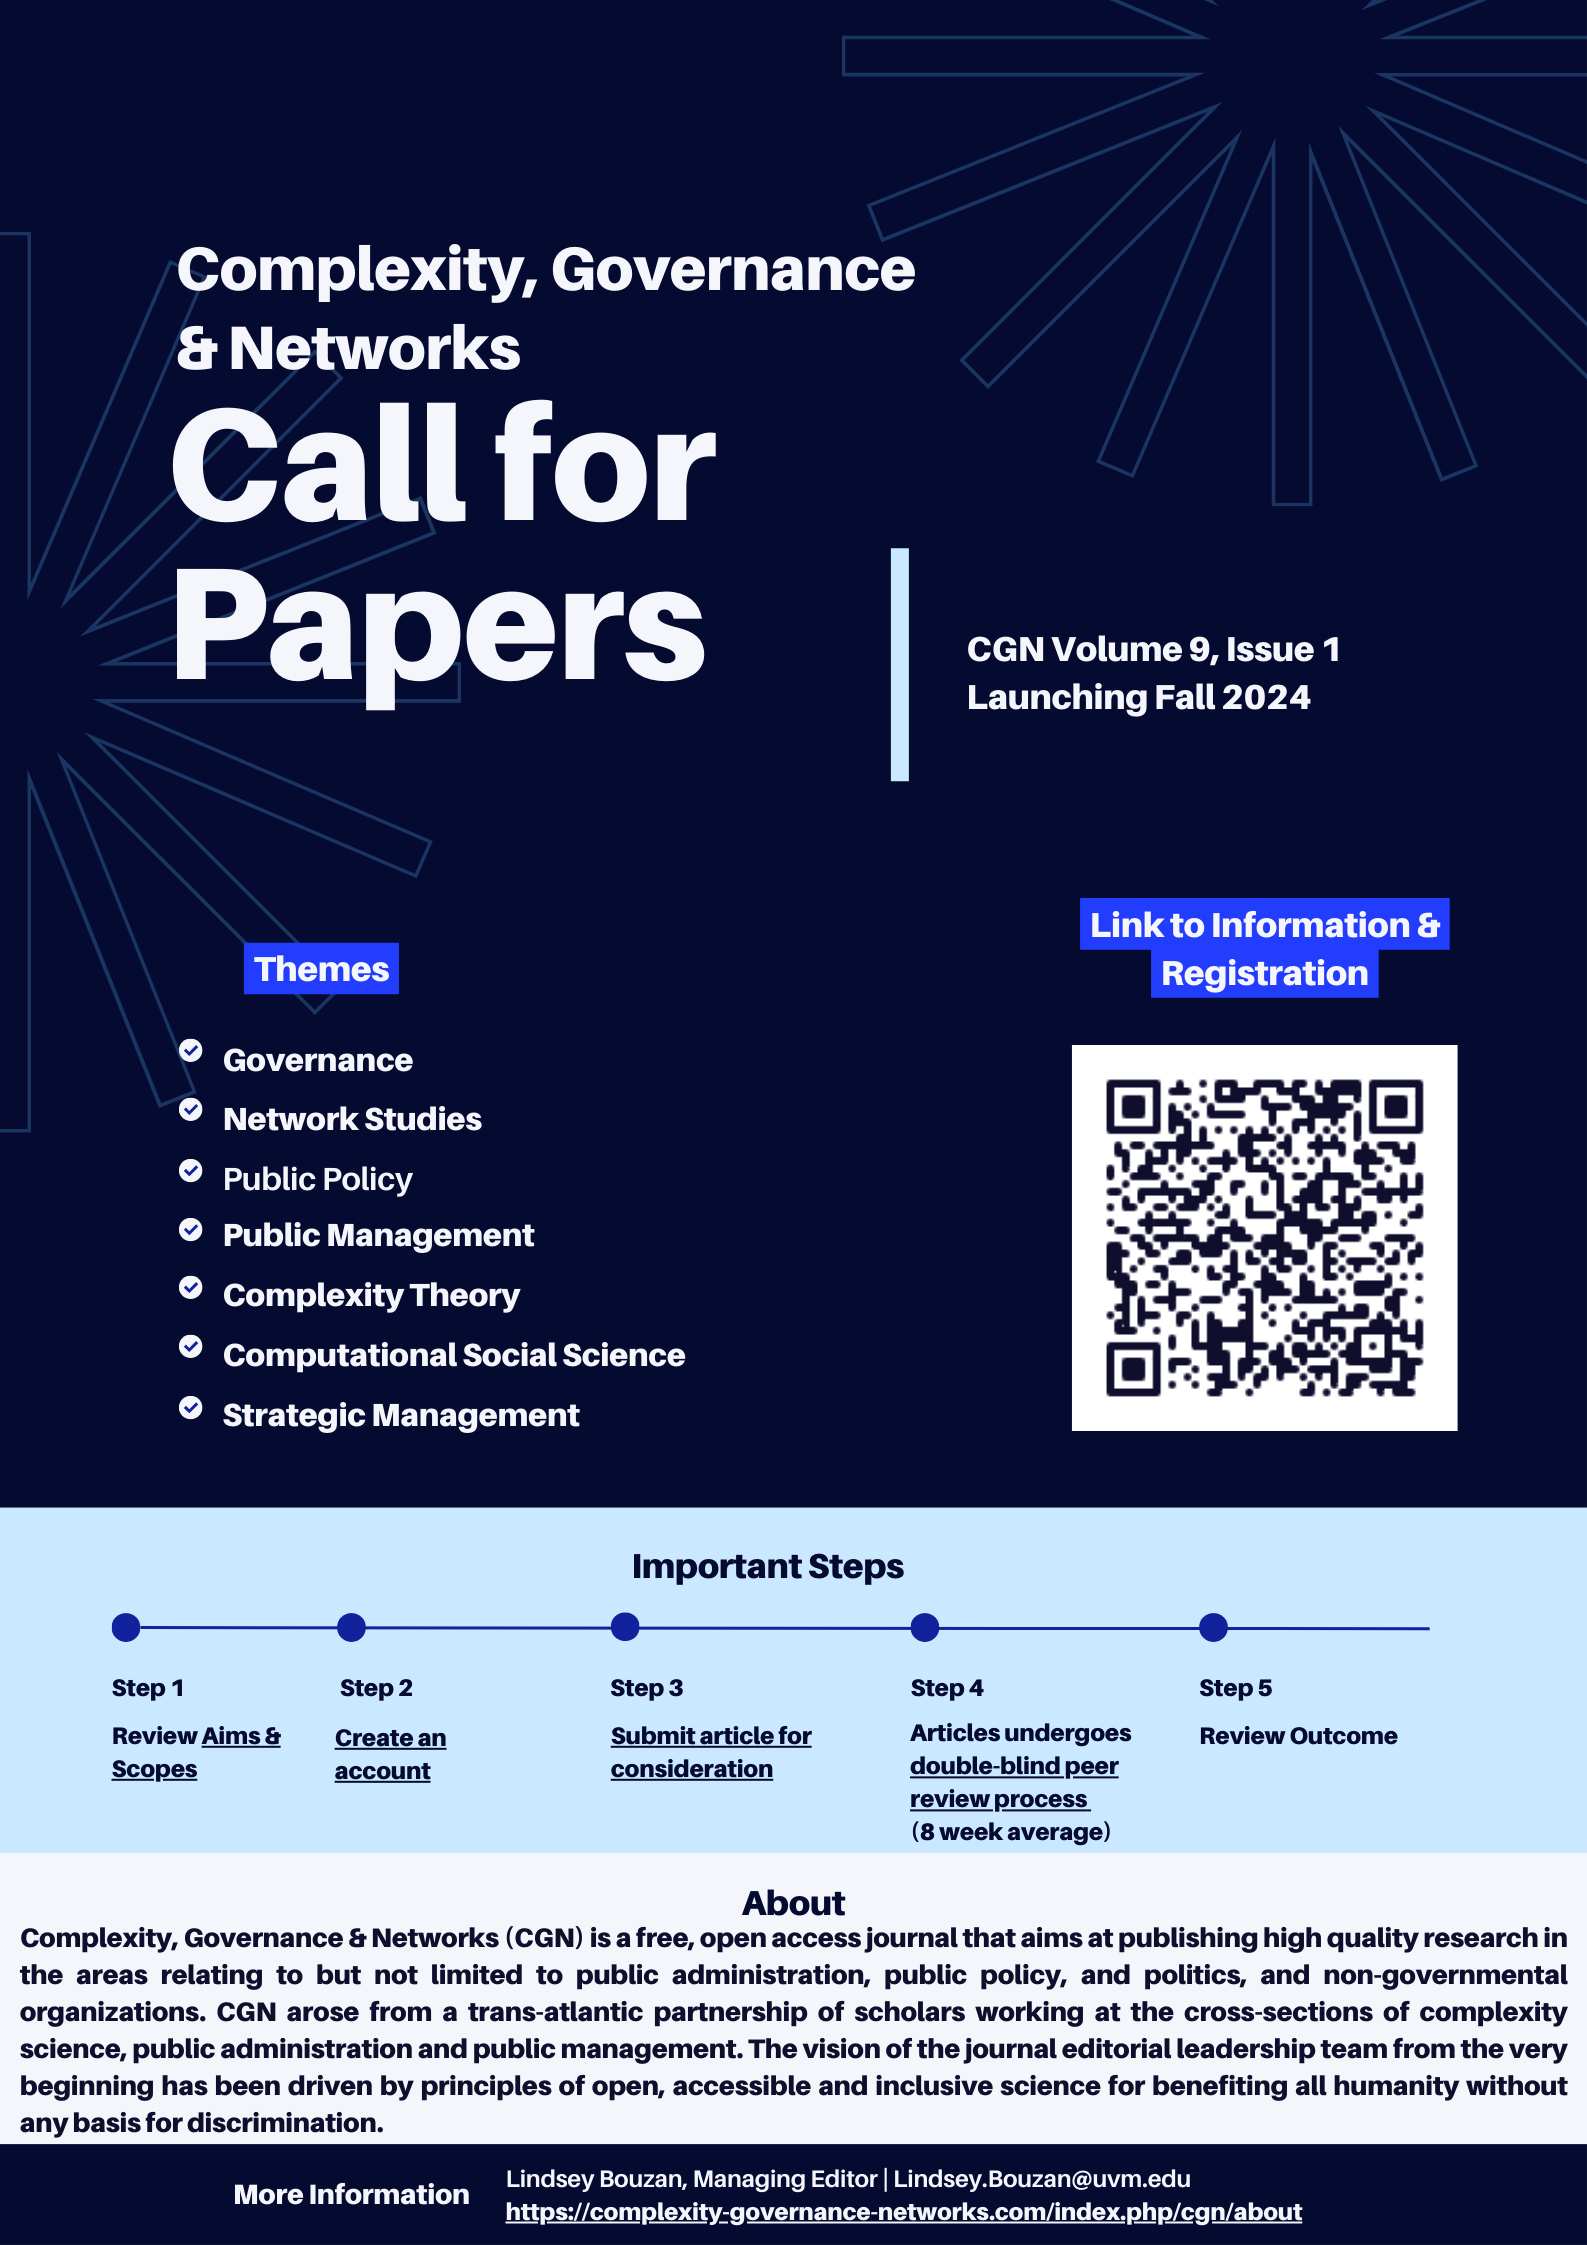 We are excited to announce "Call for Papers" for Volume 9